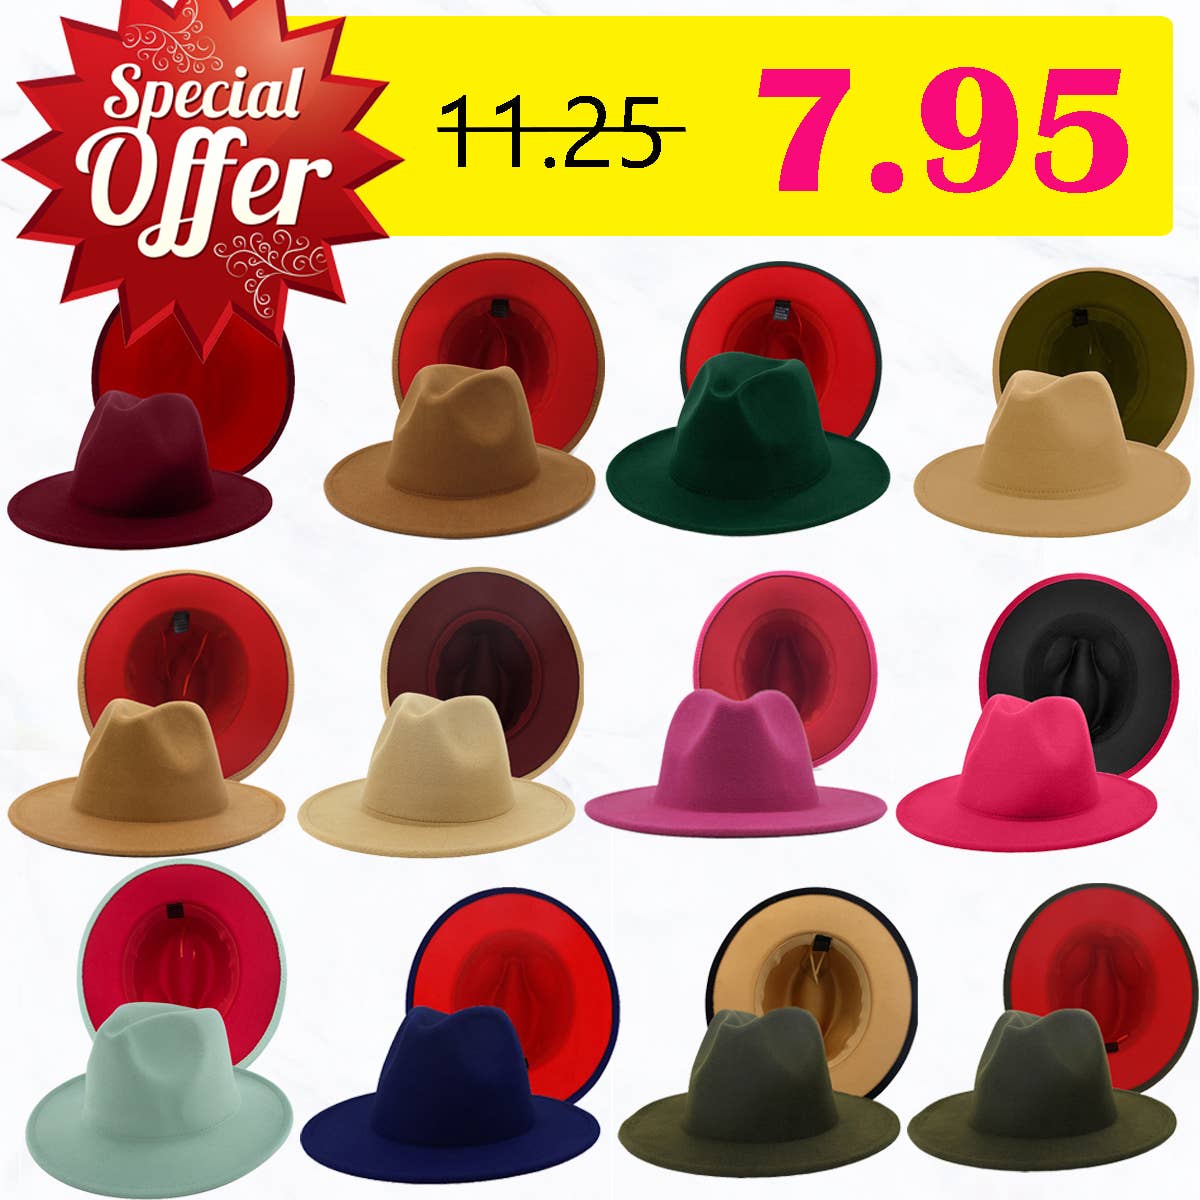 Women Double-Sided Color Matching Jazz Hat: Black/hot pink